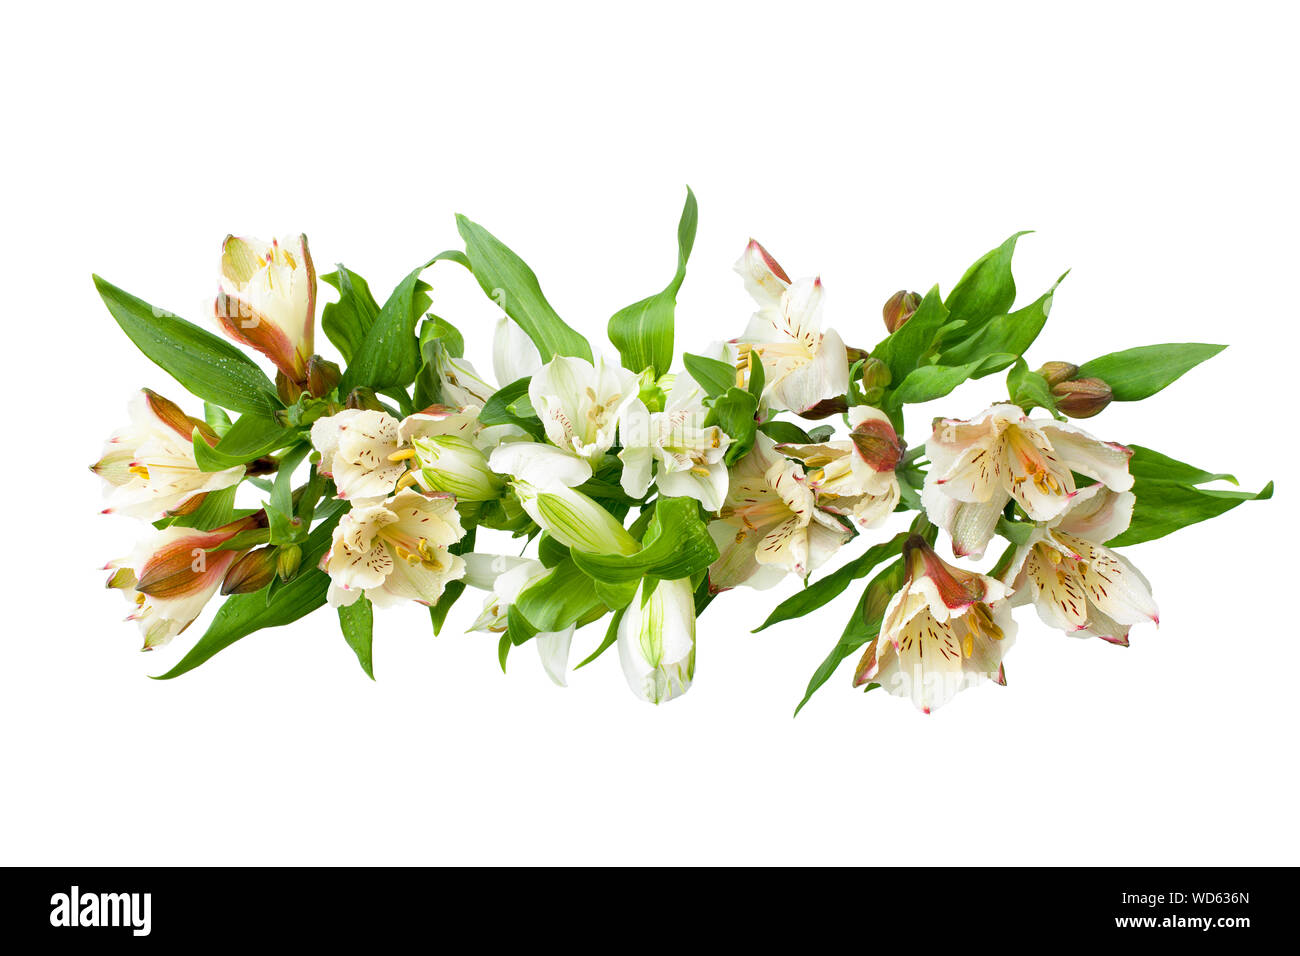 White alstroemeria flowers branch on white background isolated close up, lily flowers bunch for decorative border, holiday poster, design element Stock Photo